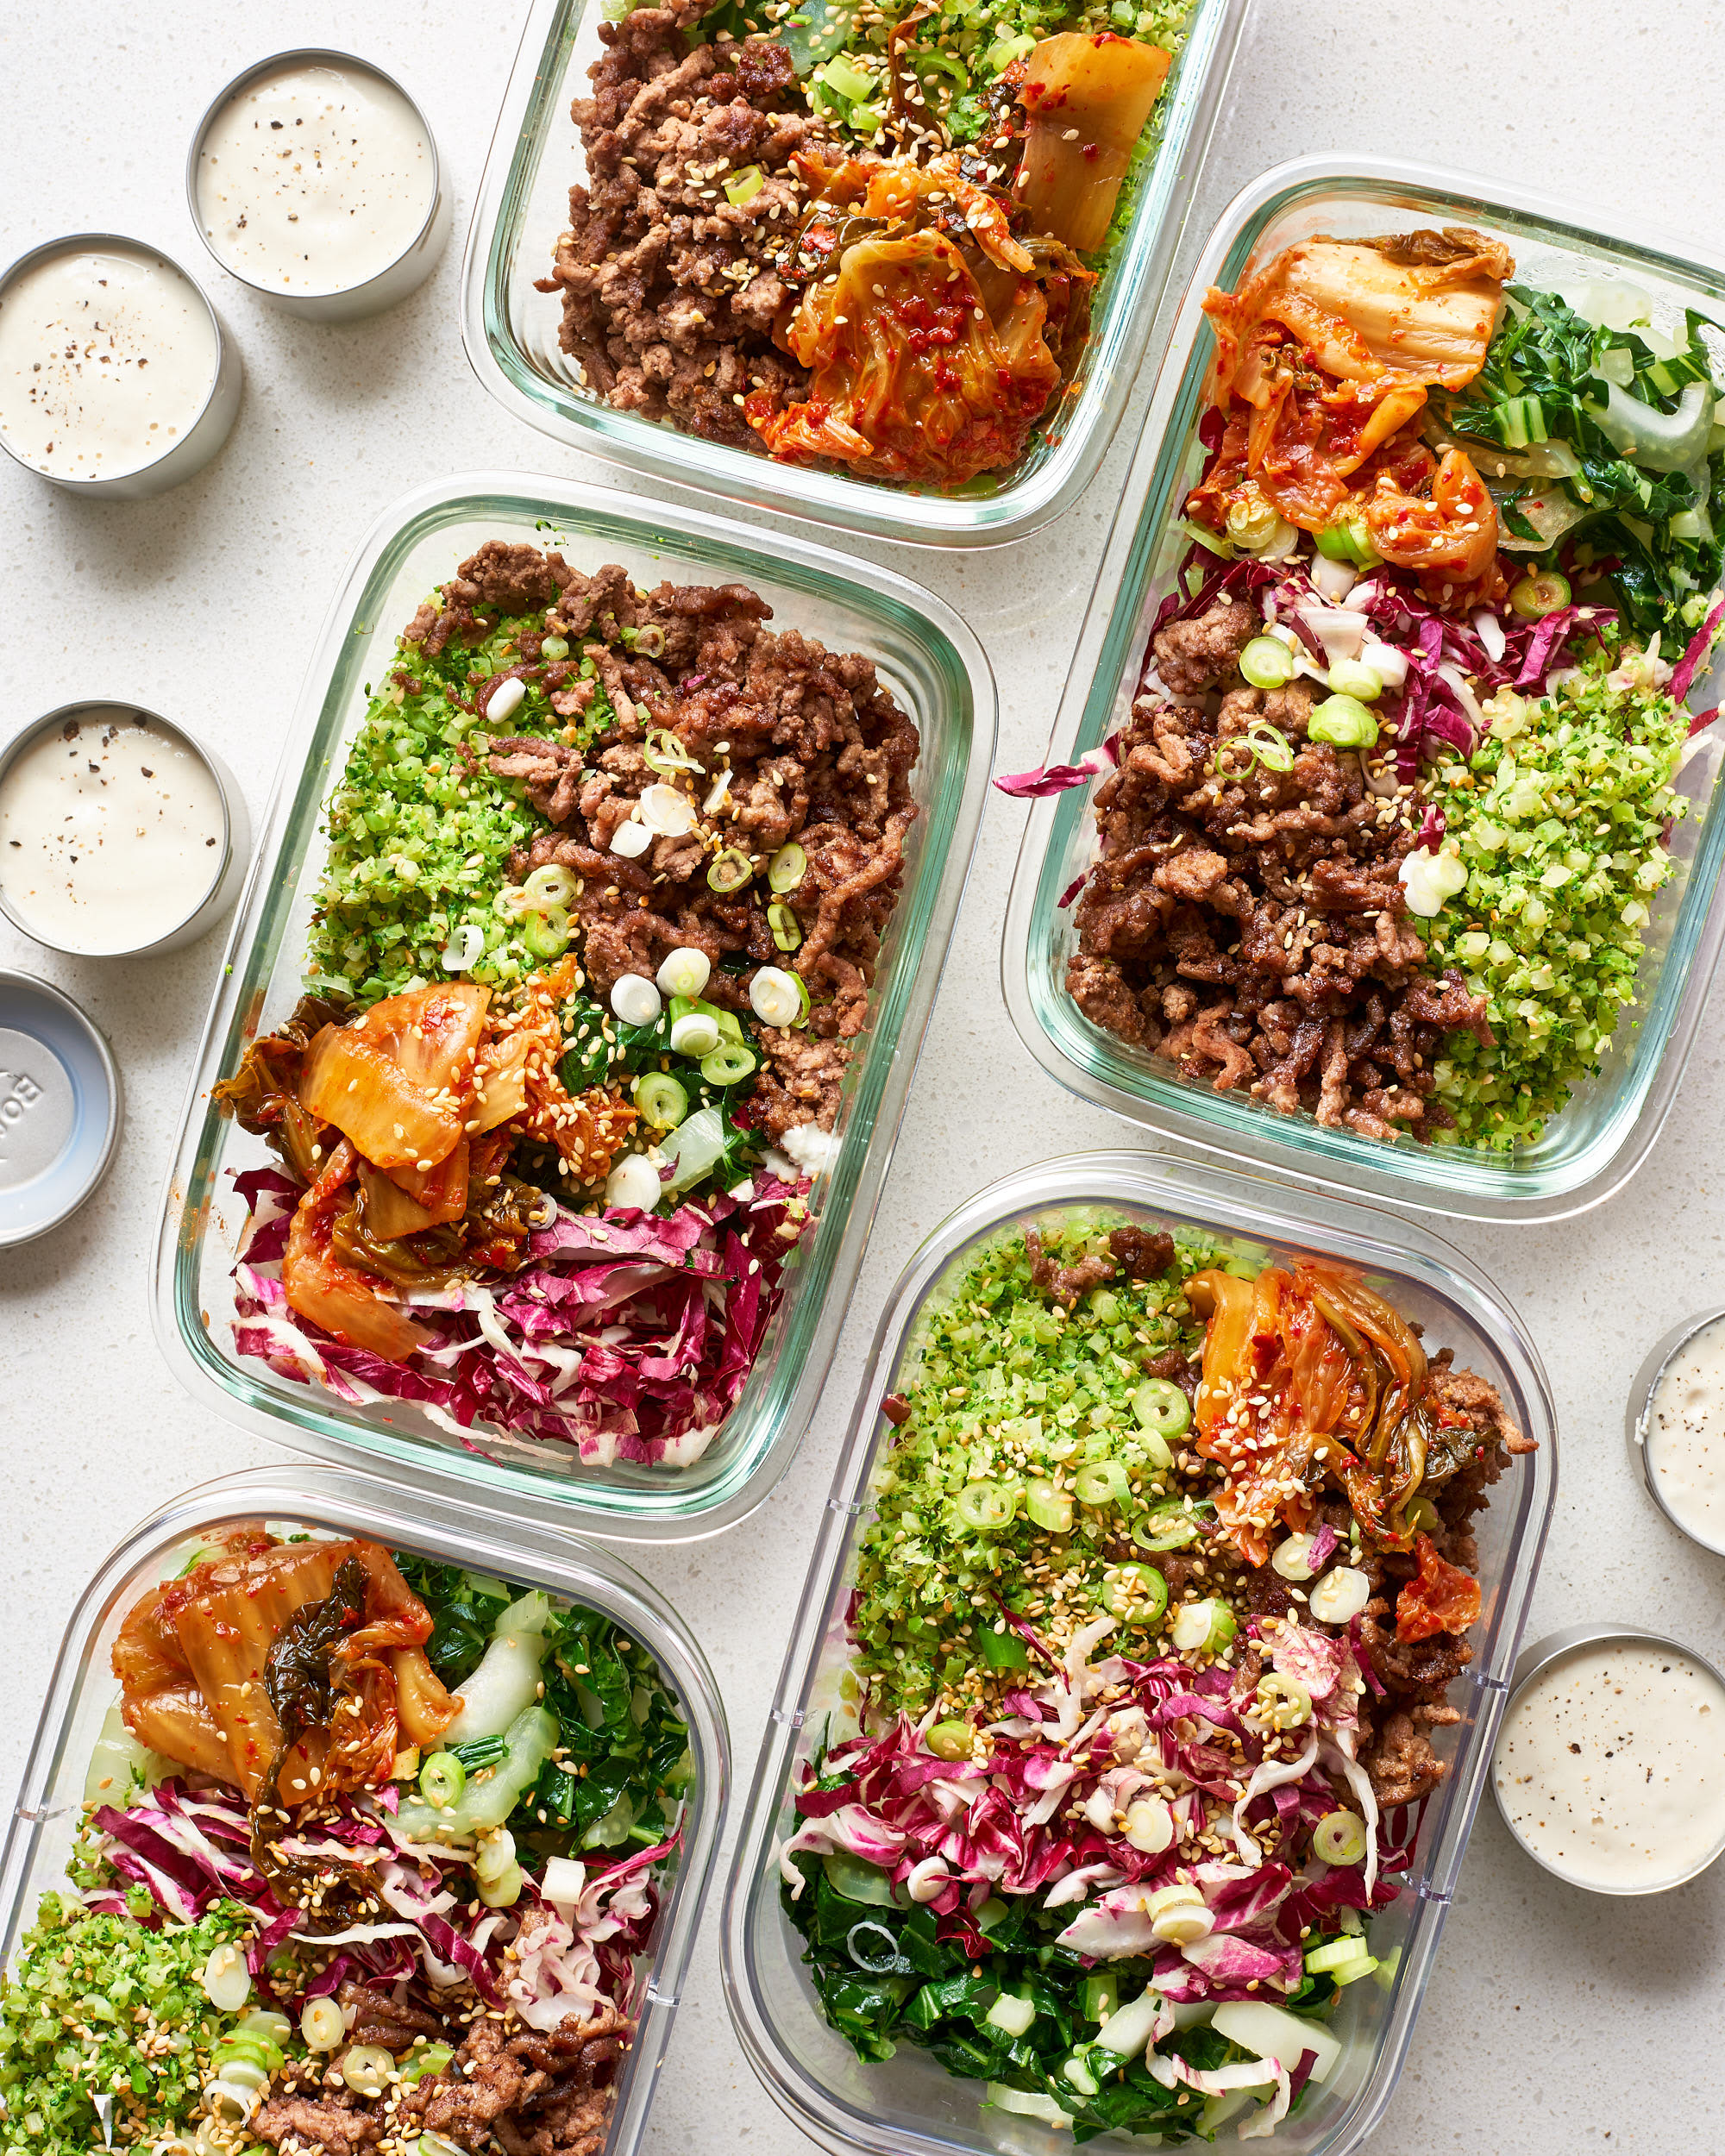 Meal Prep Essentials for the Healthiest Week Yet